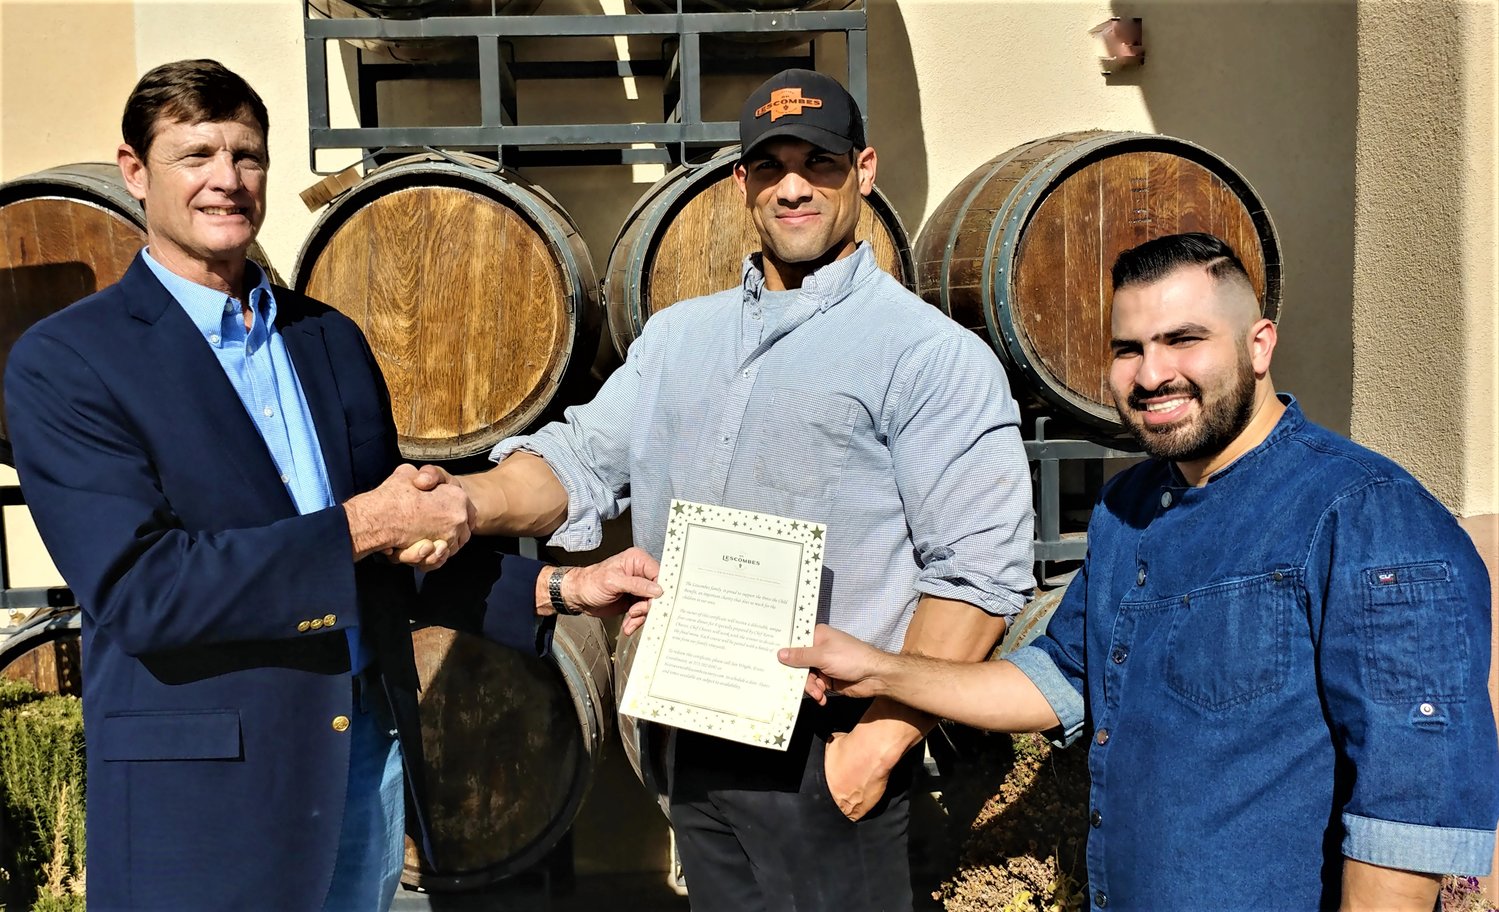 Las Cruces Dress the Child program coordinator Doug Boberg, left, was at Lescombes Family Vineyards a few days before Christmas to thank General Manager Thomas Perez, center, and Executive Chef Kevin Chavez for Lescombes’ long-time support of Dress the Child. The program could not hold a fundraising dinner in either 2020 or 2021 because of the pandemic, so Lescombes donated a dinner for eight, which Boberg raffled off among table hosts from previous years’ dinners. The winner was Mynatt Martínez Springer P.C. law firm of Las Cruces. The raffle raised $3,500. Dress the Child dressed 99 economically deprived students from the Gadsden Independent School District and 20 from Las Cruces Public Schools during shopping events earlier this month, Boberg said. It expects to dress an additional 100 LCPS students in early 2022. Each participating child receives $130 to $150 in new clothes and shoes in Dress the Child’s partnership with local merchants. Send donation checks to Dress the Child, P.O. Box 550, Las Cruces, N.M. 88004, or take them to Julie Koenig, First New Mexico Bank, 3000 E. Lohman Ave. in Las Cruces. Contact Boberg at 575-644-9469 or drboberg@gmail.com.